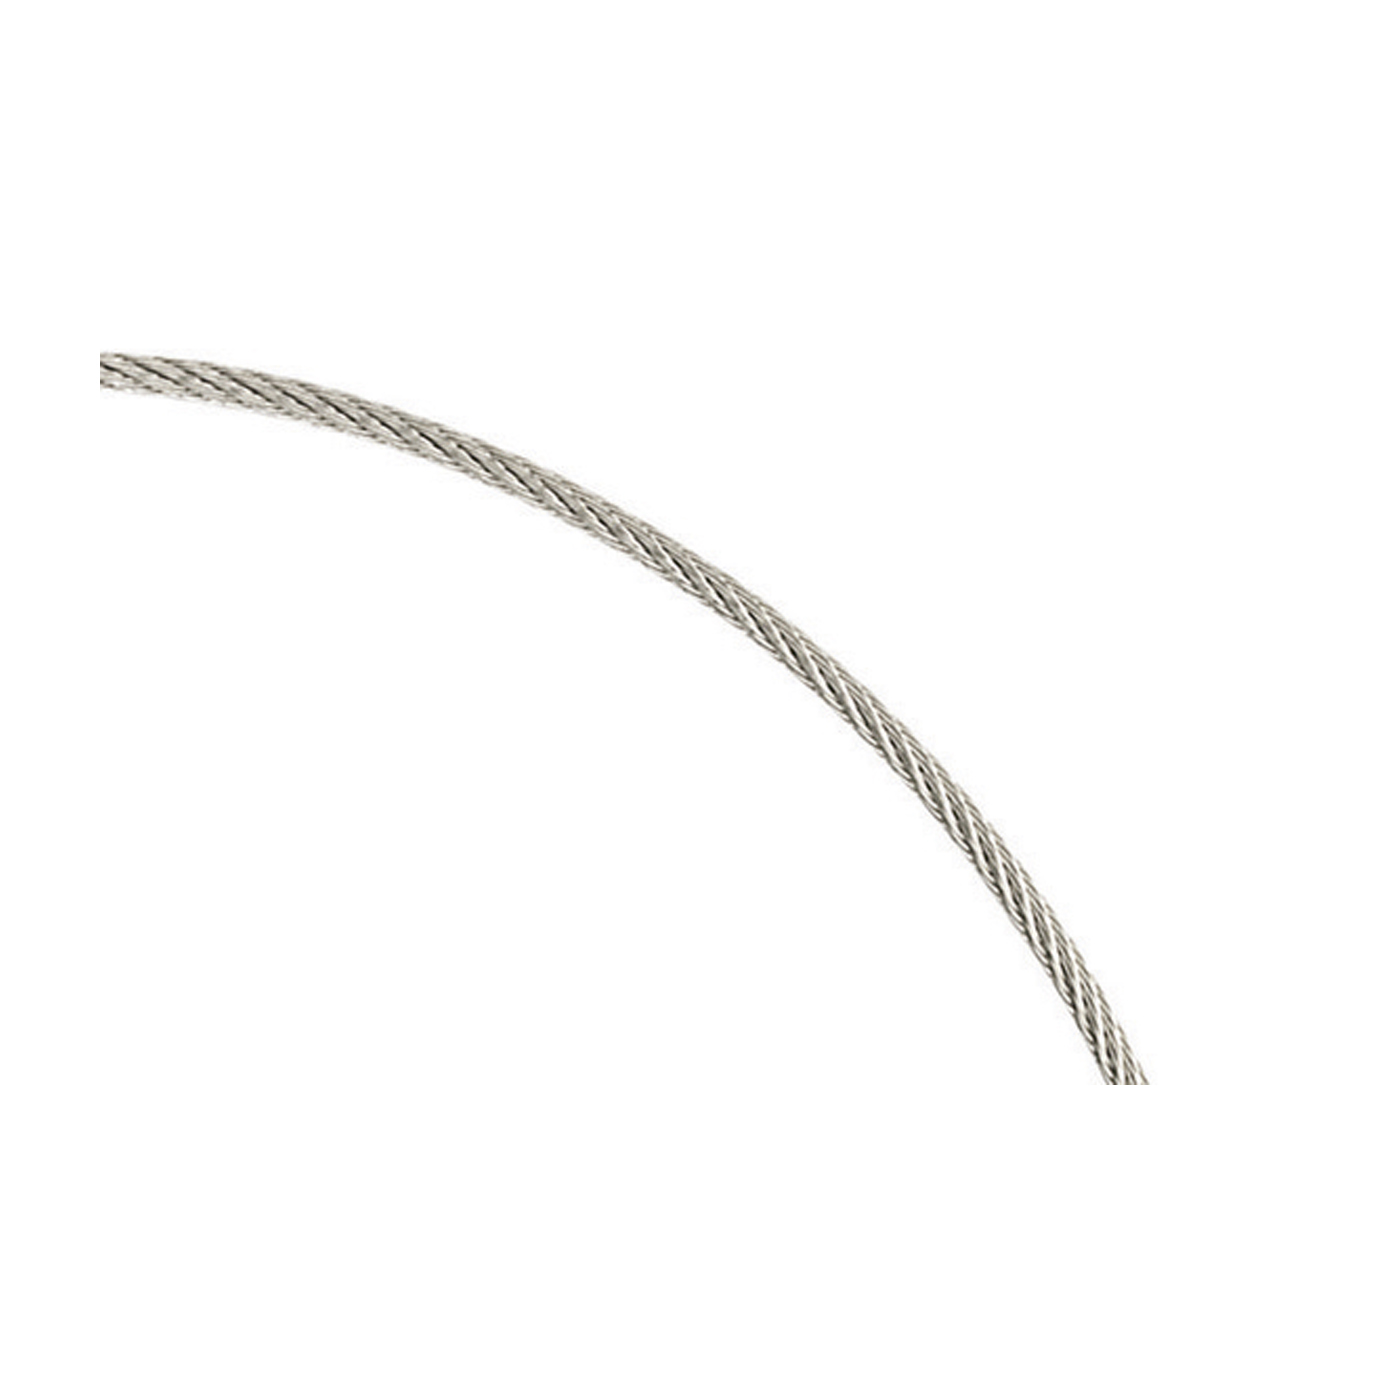 Steel Cable Neck Wire, ø 1.35 mm, 42 cm - 1 piece